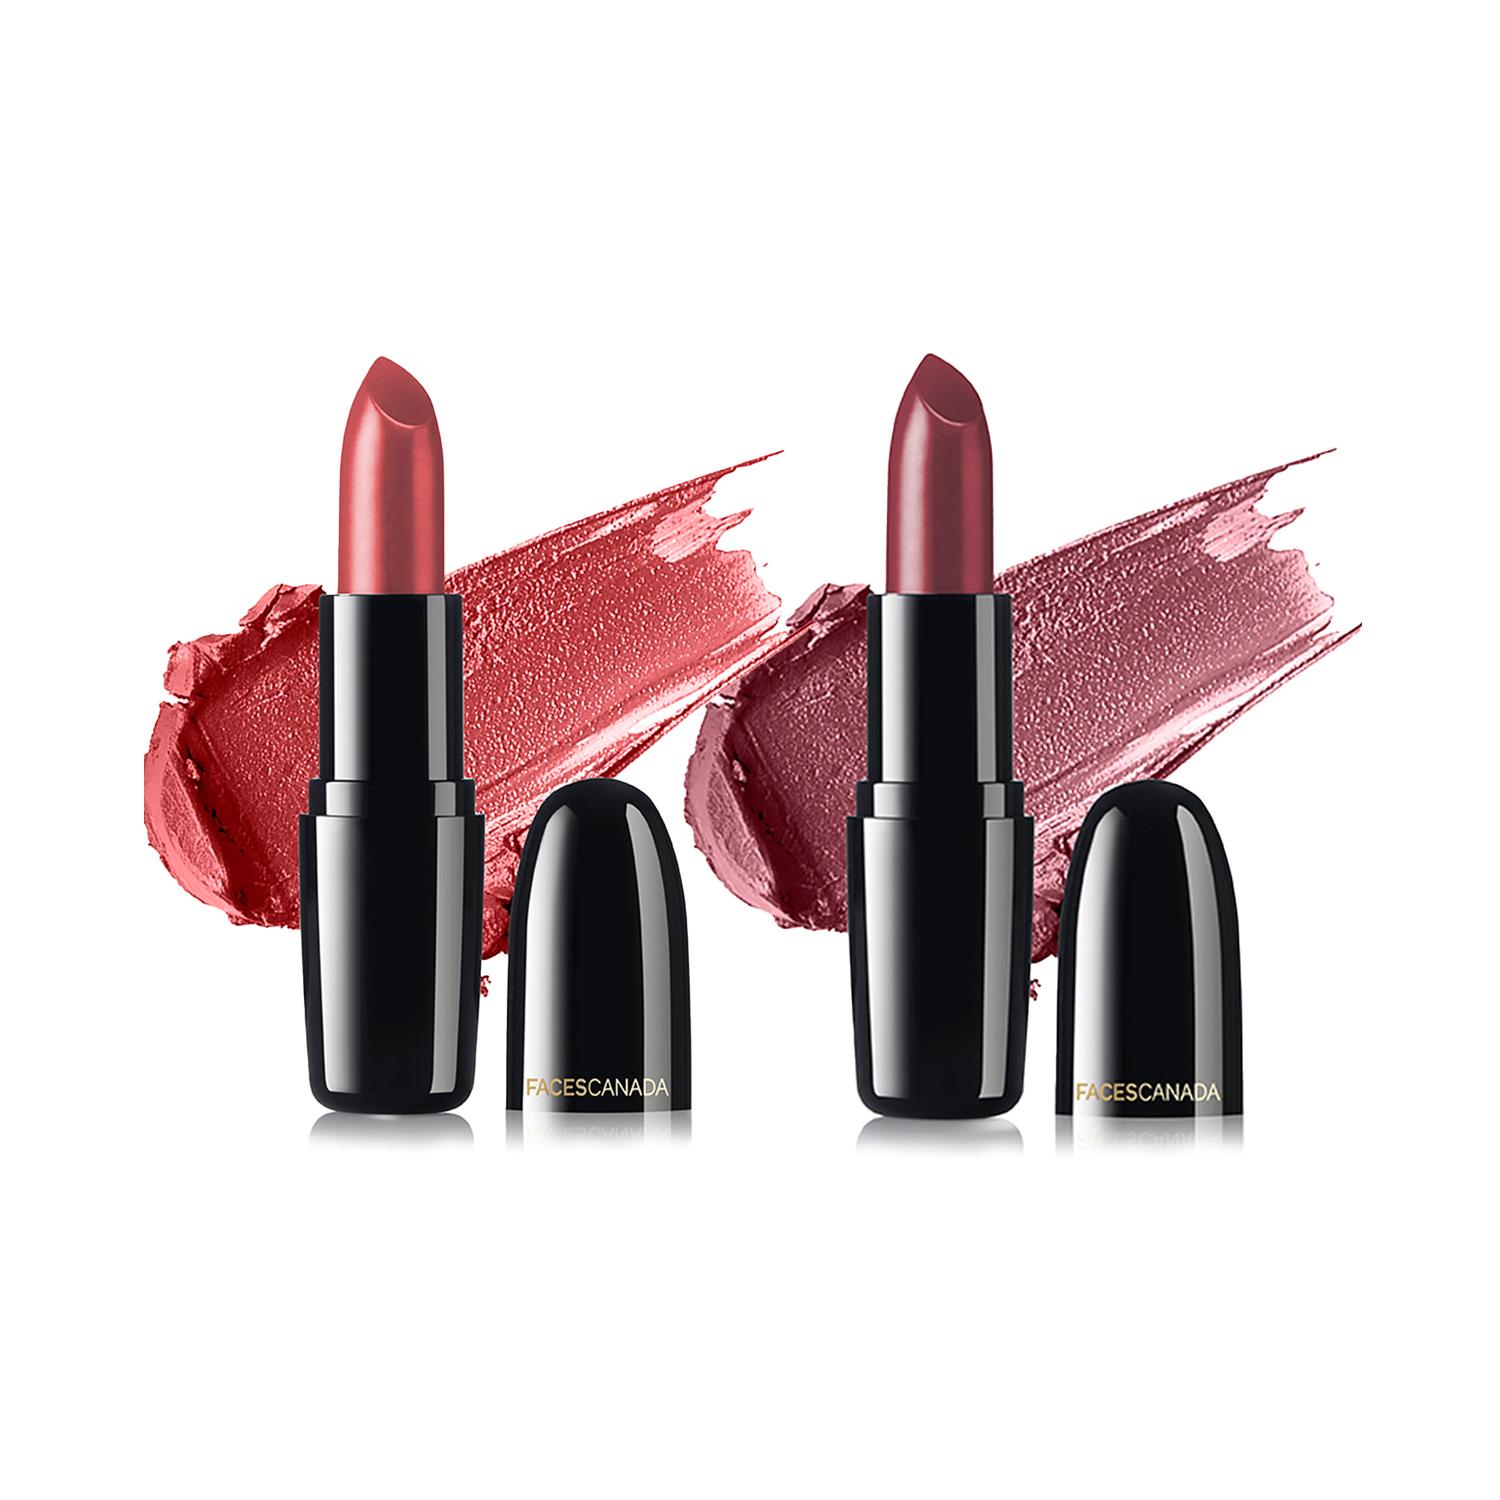 Faces Canada | Faces Canada Festive Pout - Weightless Creme Finish Lipstick Pack of 2 - Amber & Love Nude